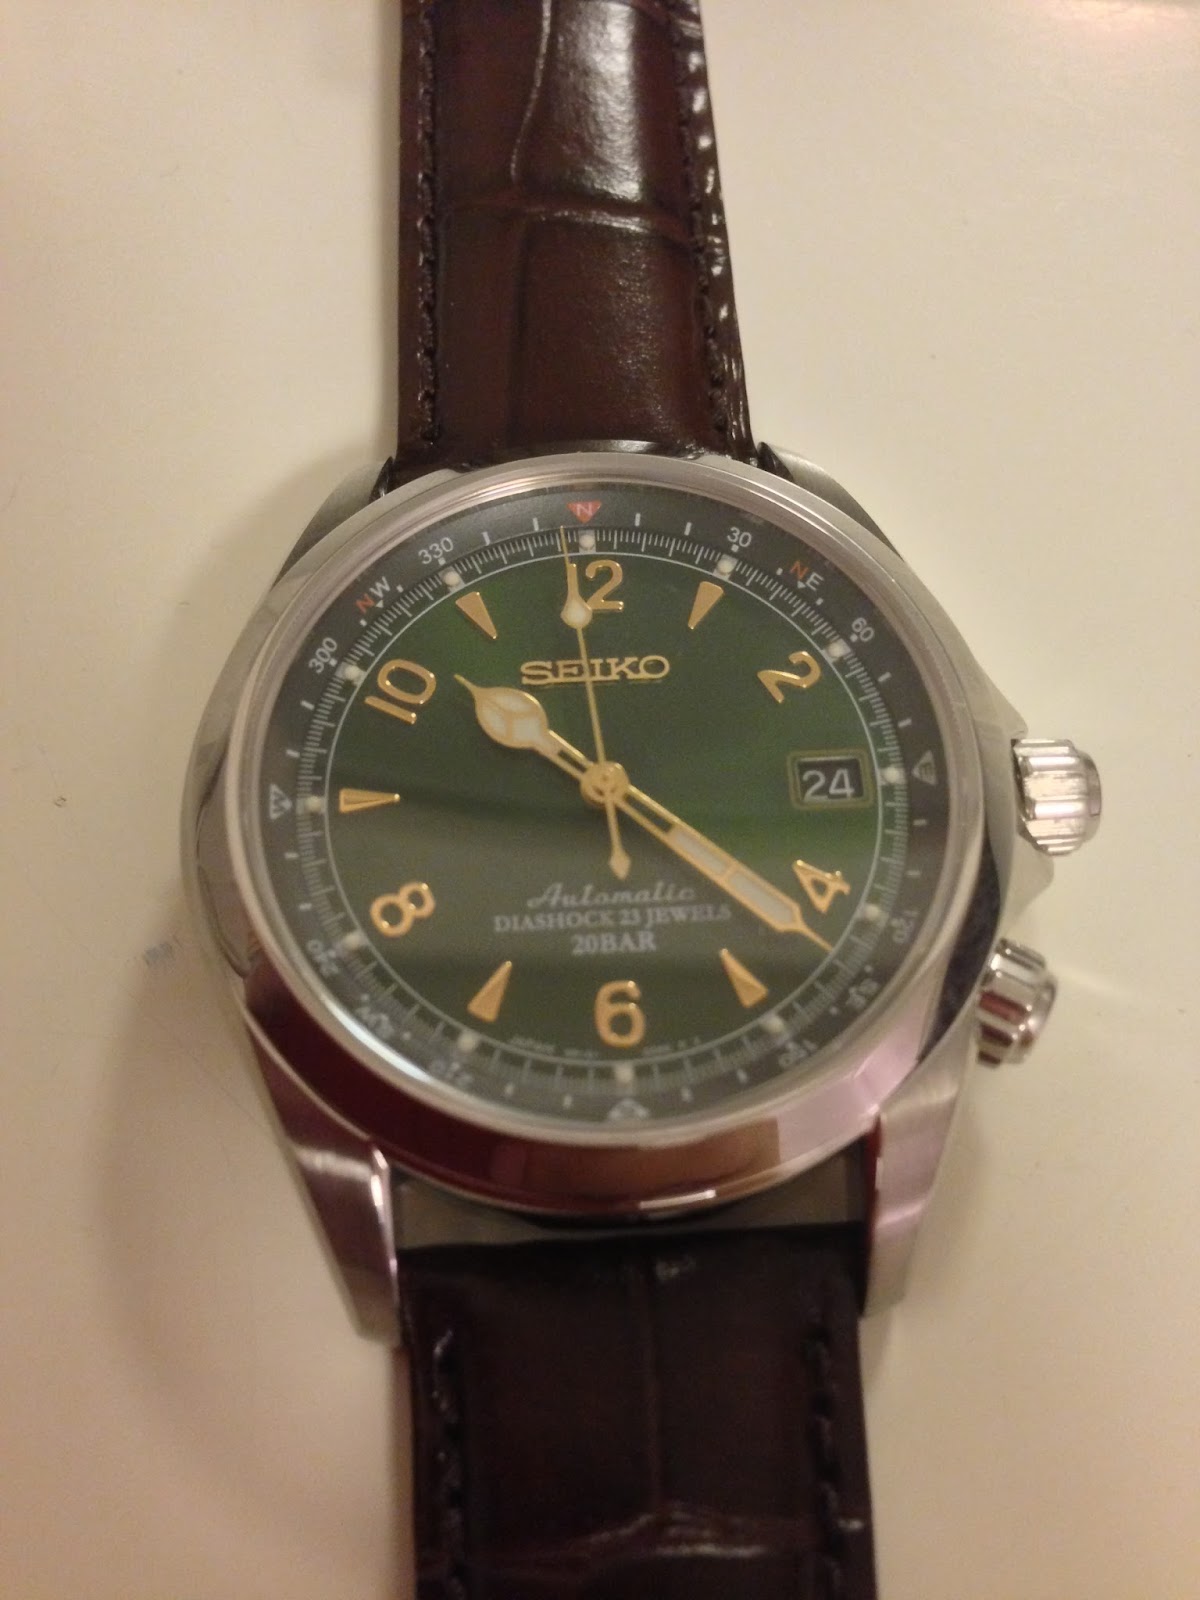 My Eastern Watch Collection: Seiko SARB017 Alpinist – A Very Refined  Gentleman's Sports Watch Classic (Updated with more photos)